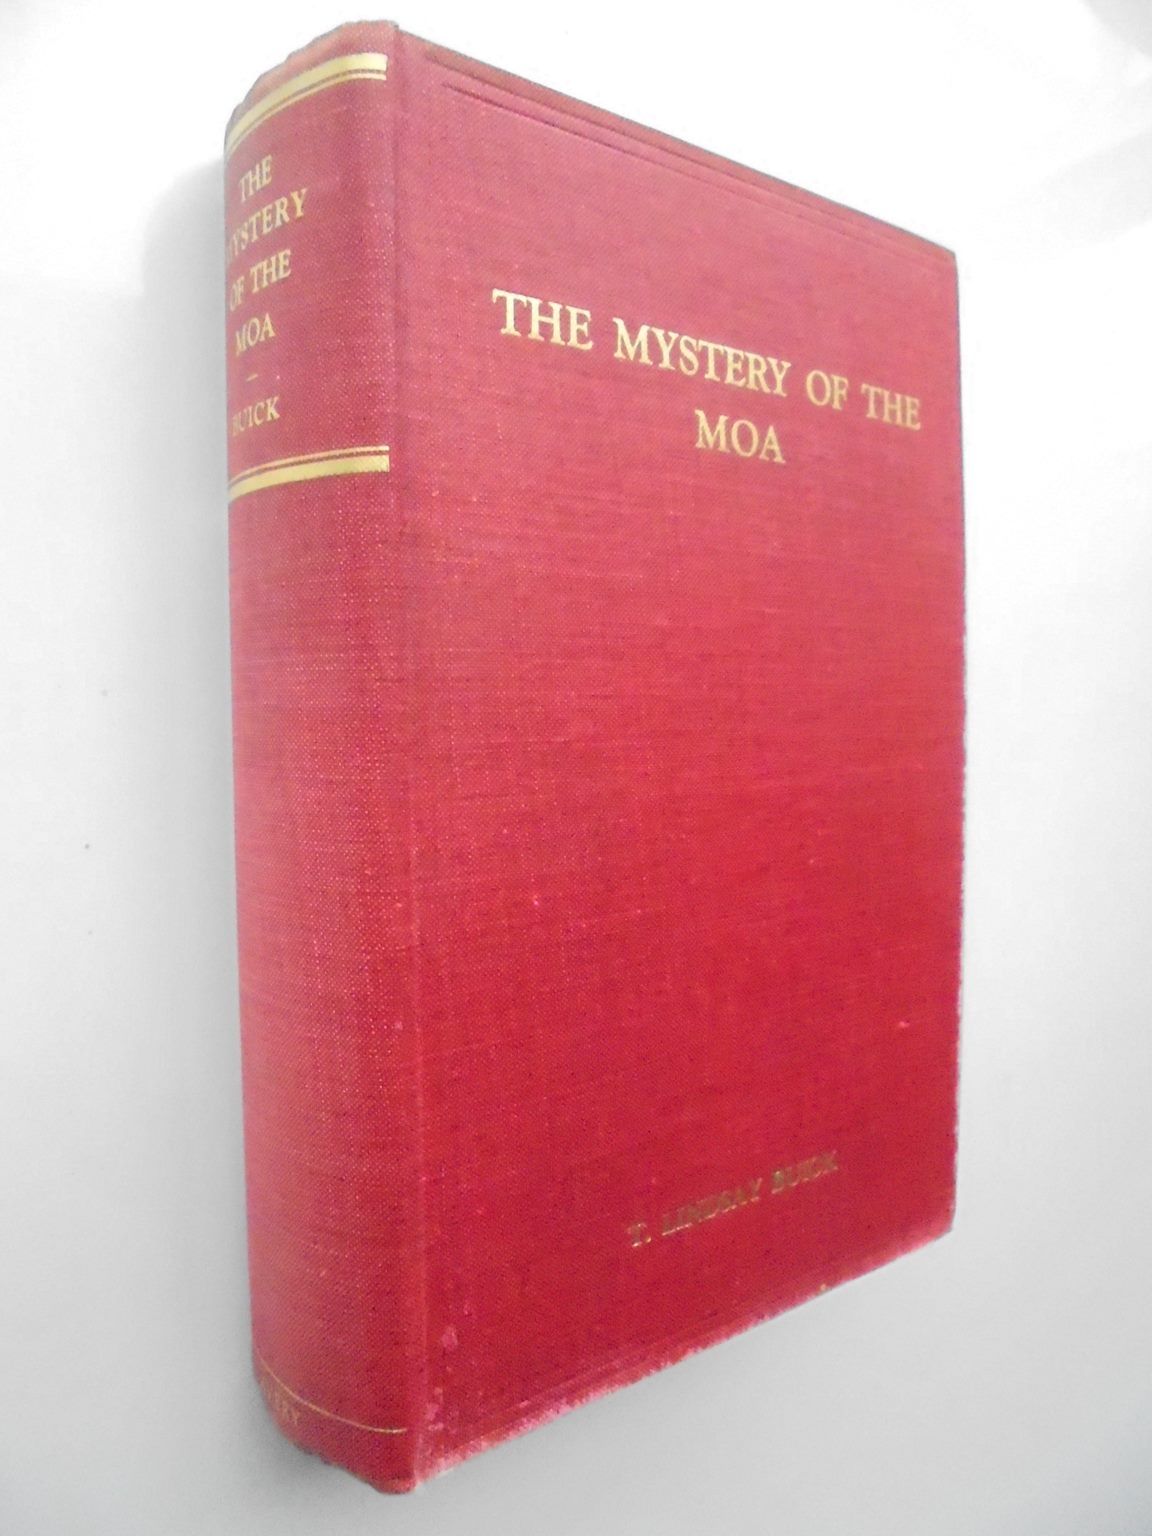 The Mystery of the Moa - by T. Lindsay Buick. [First Edition]